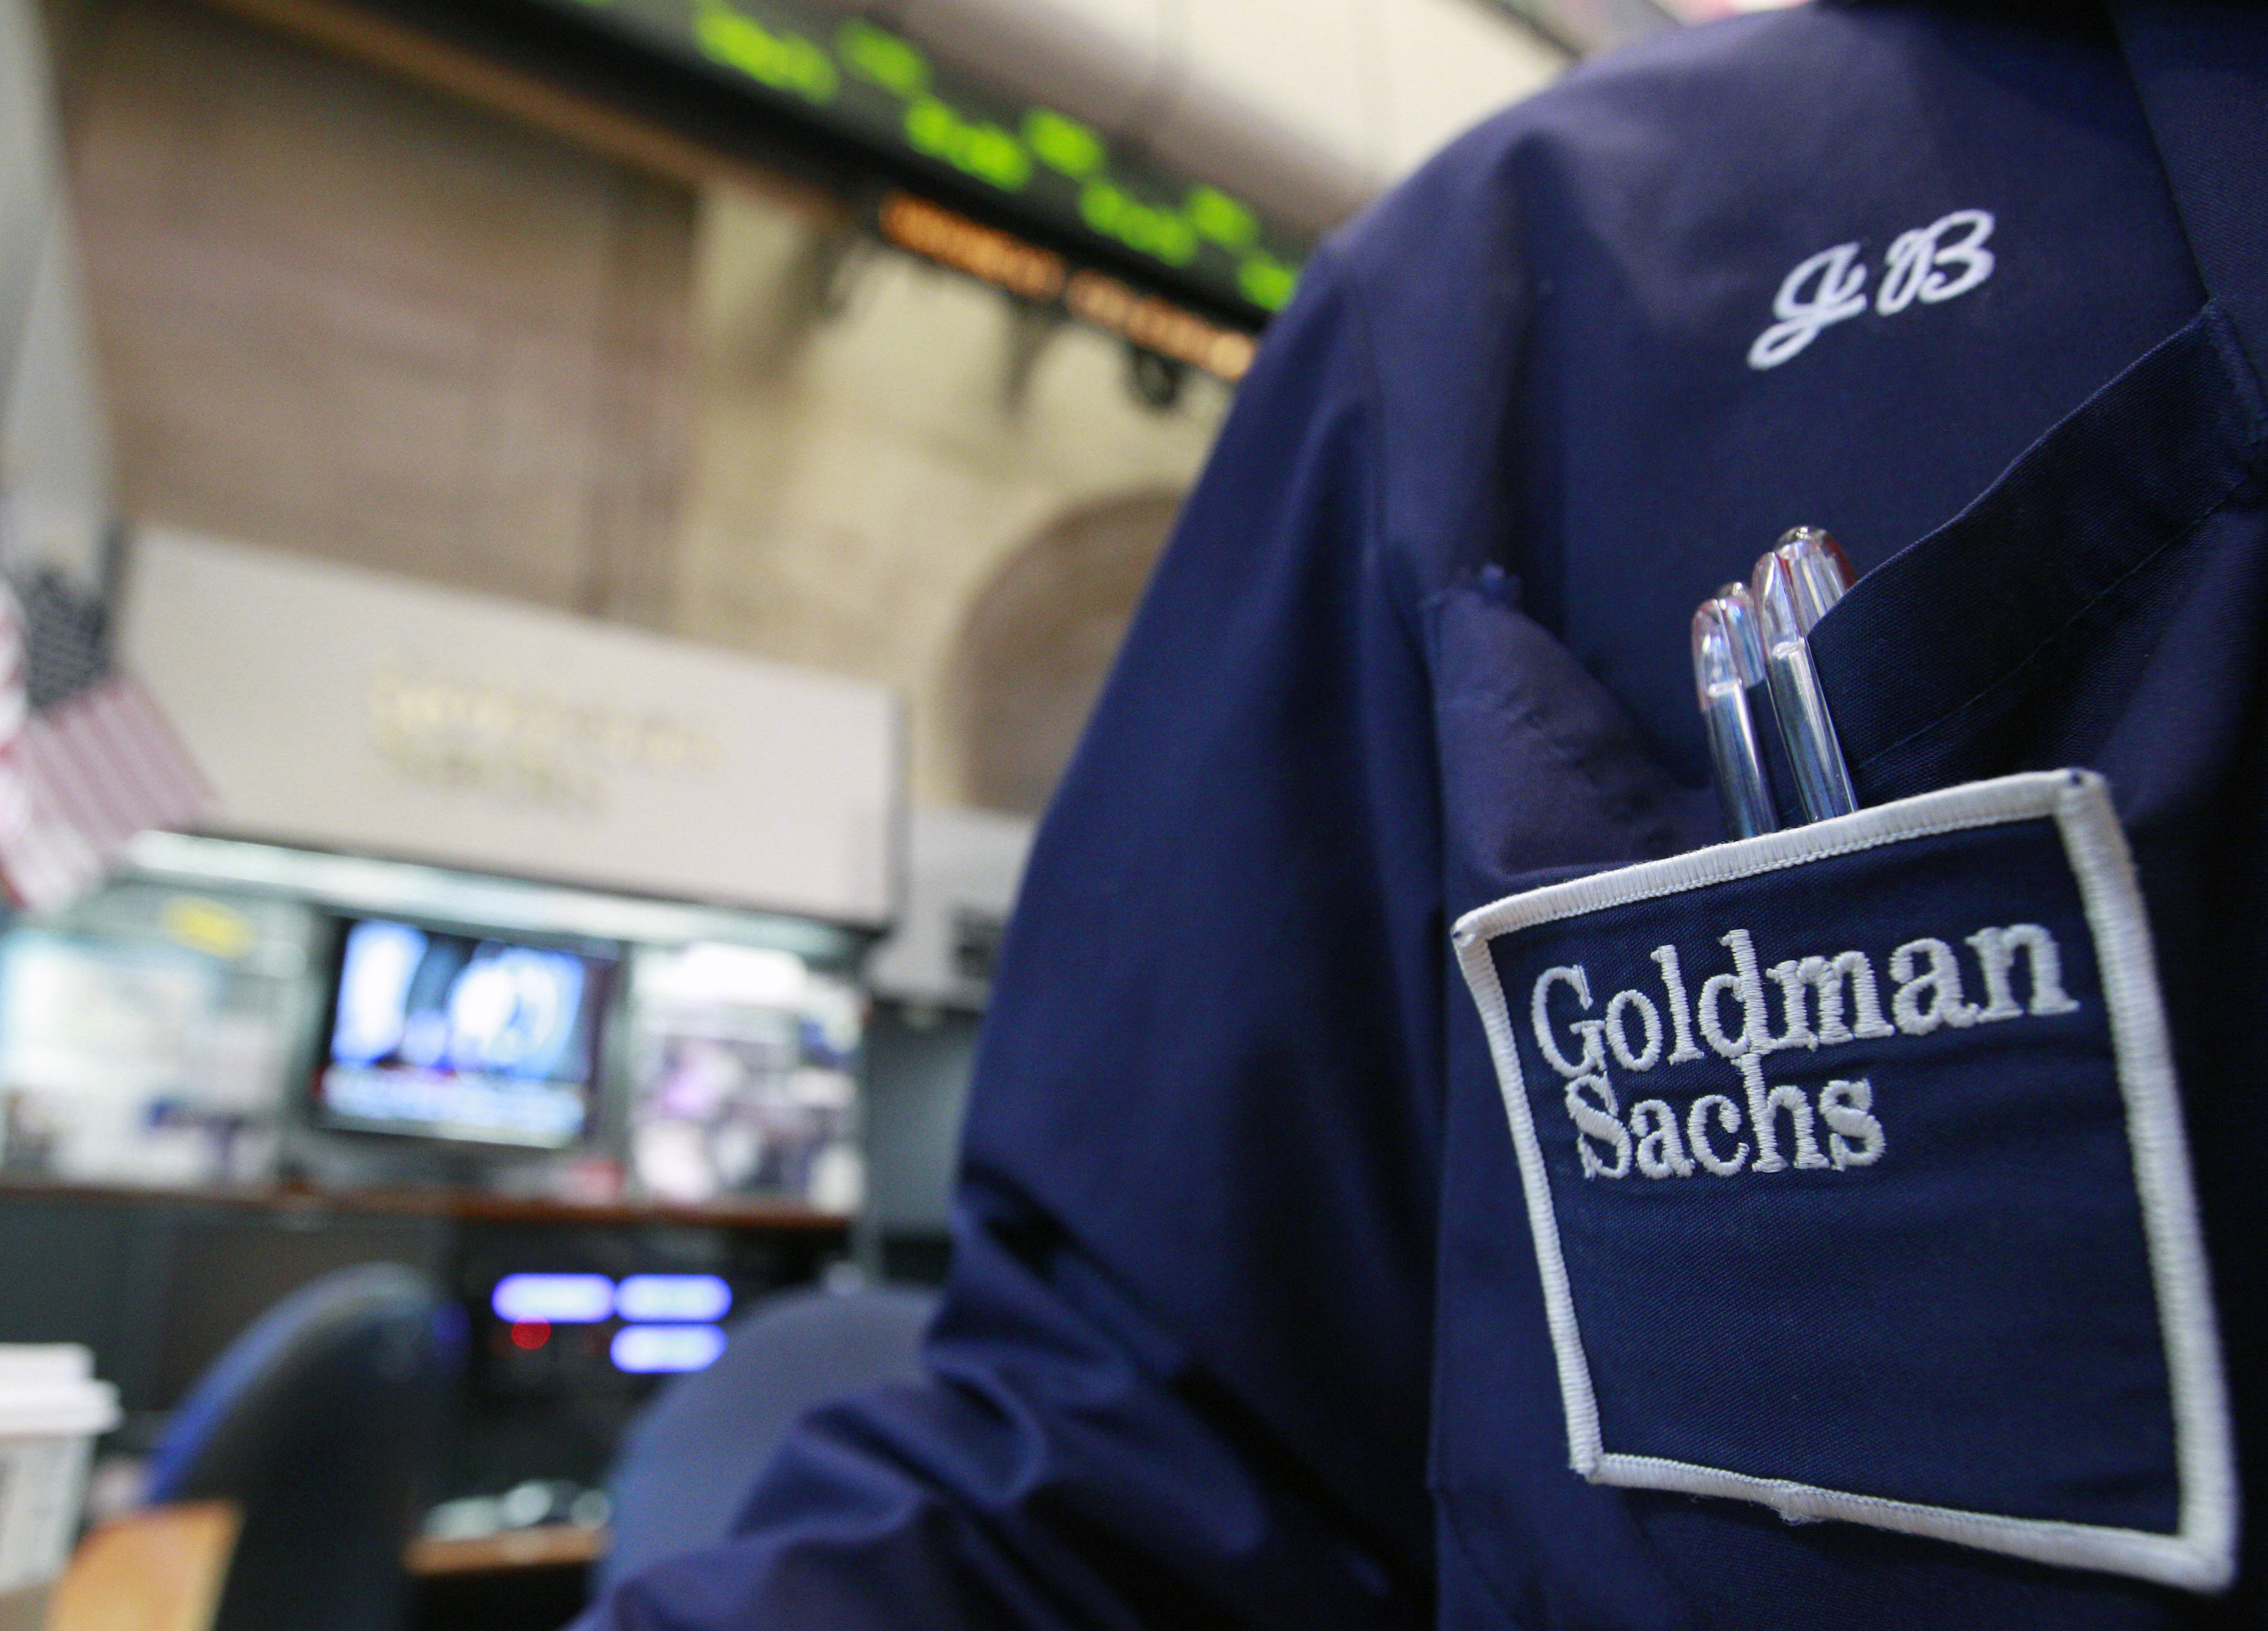 A trader works at the Goldman Sachs stall on the floor of the New York Stock Exchange